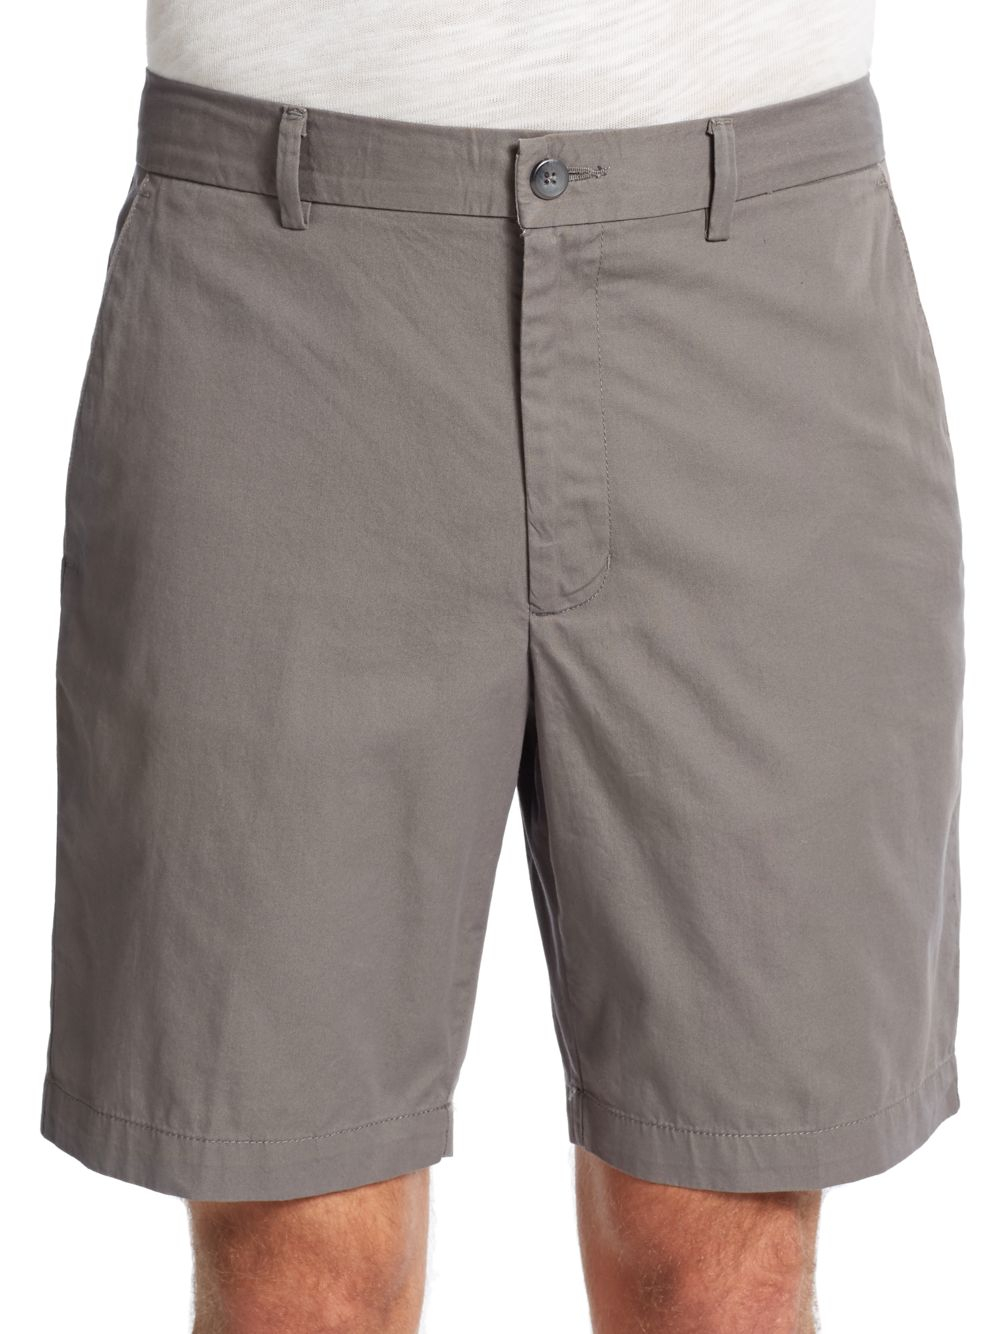 Lyst - Perry Ellis Oxford Cotton Shorts in Gray for Men